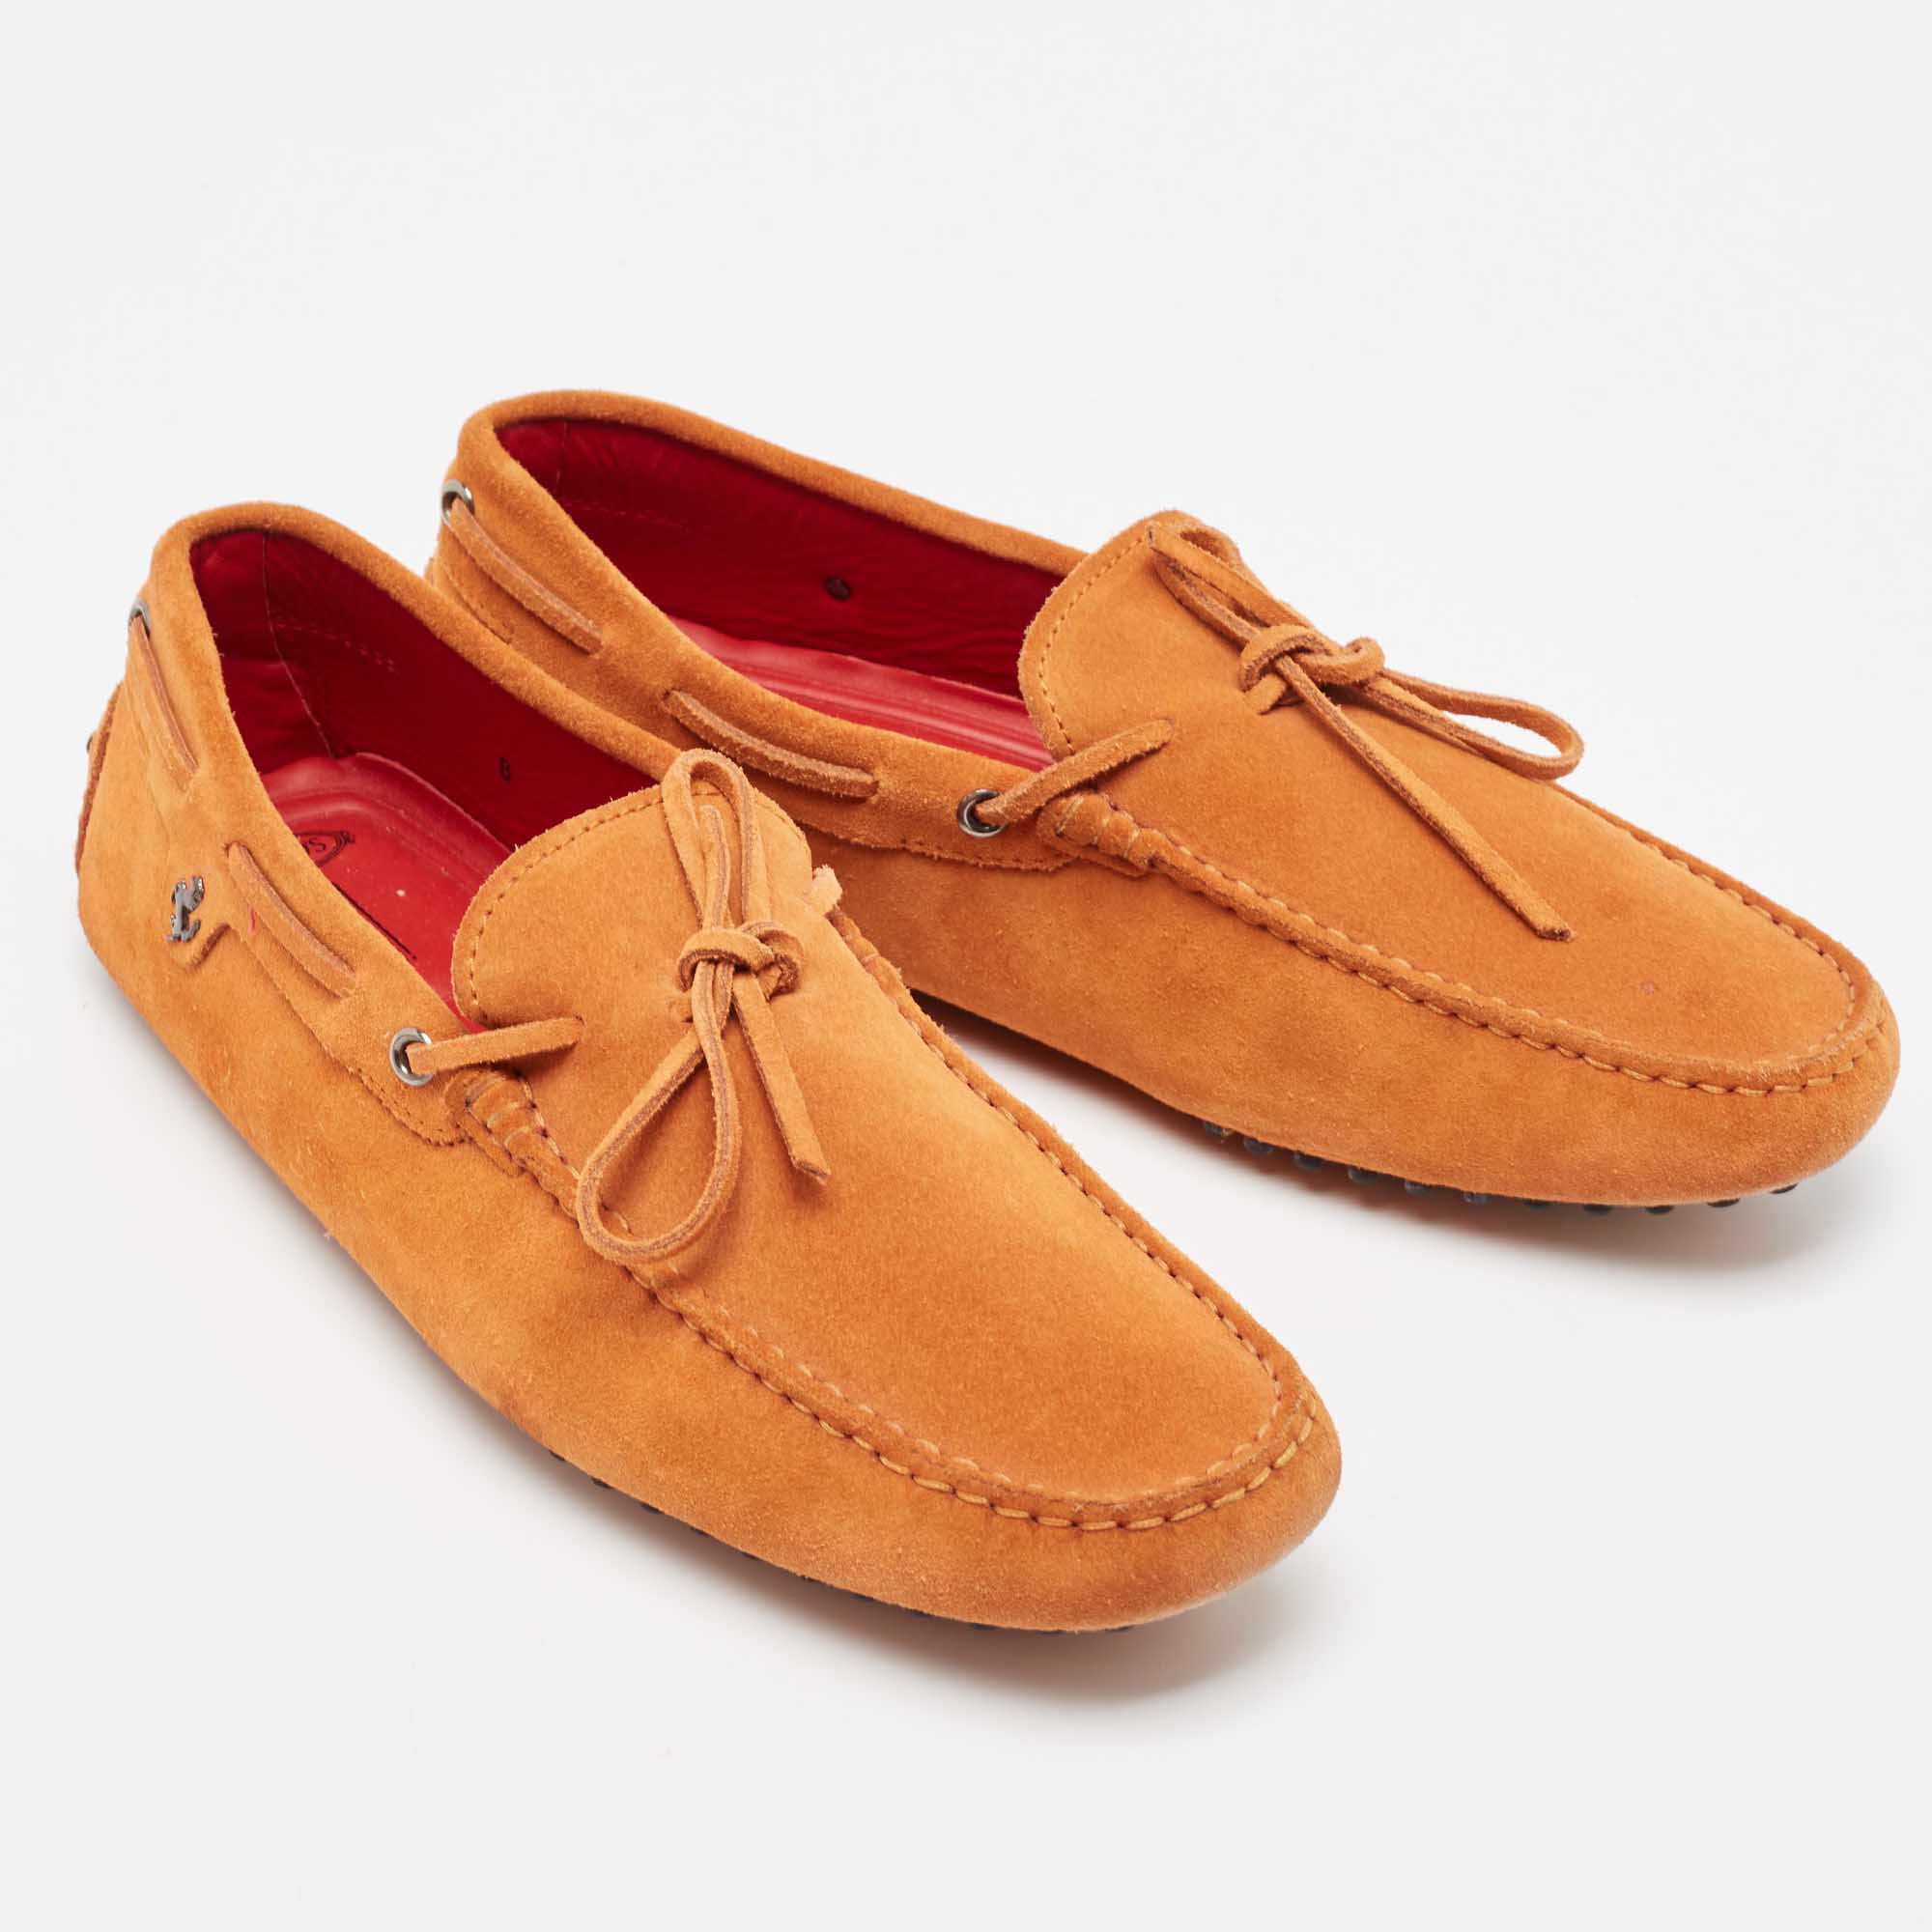 Tod's By Ferrari Orange Suede Leather Gommino Slip On Loafers Size 42